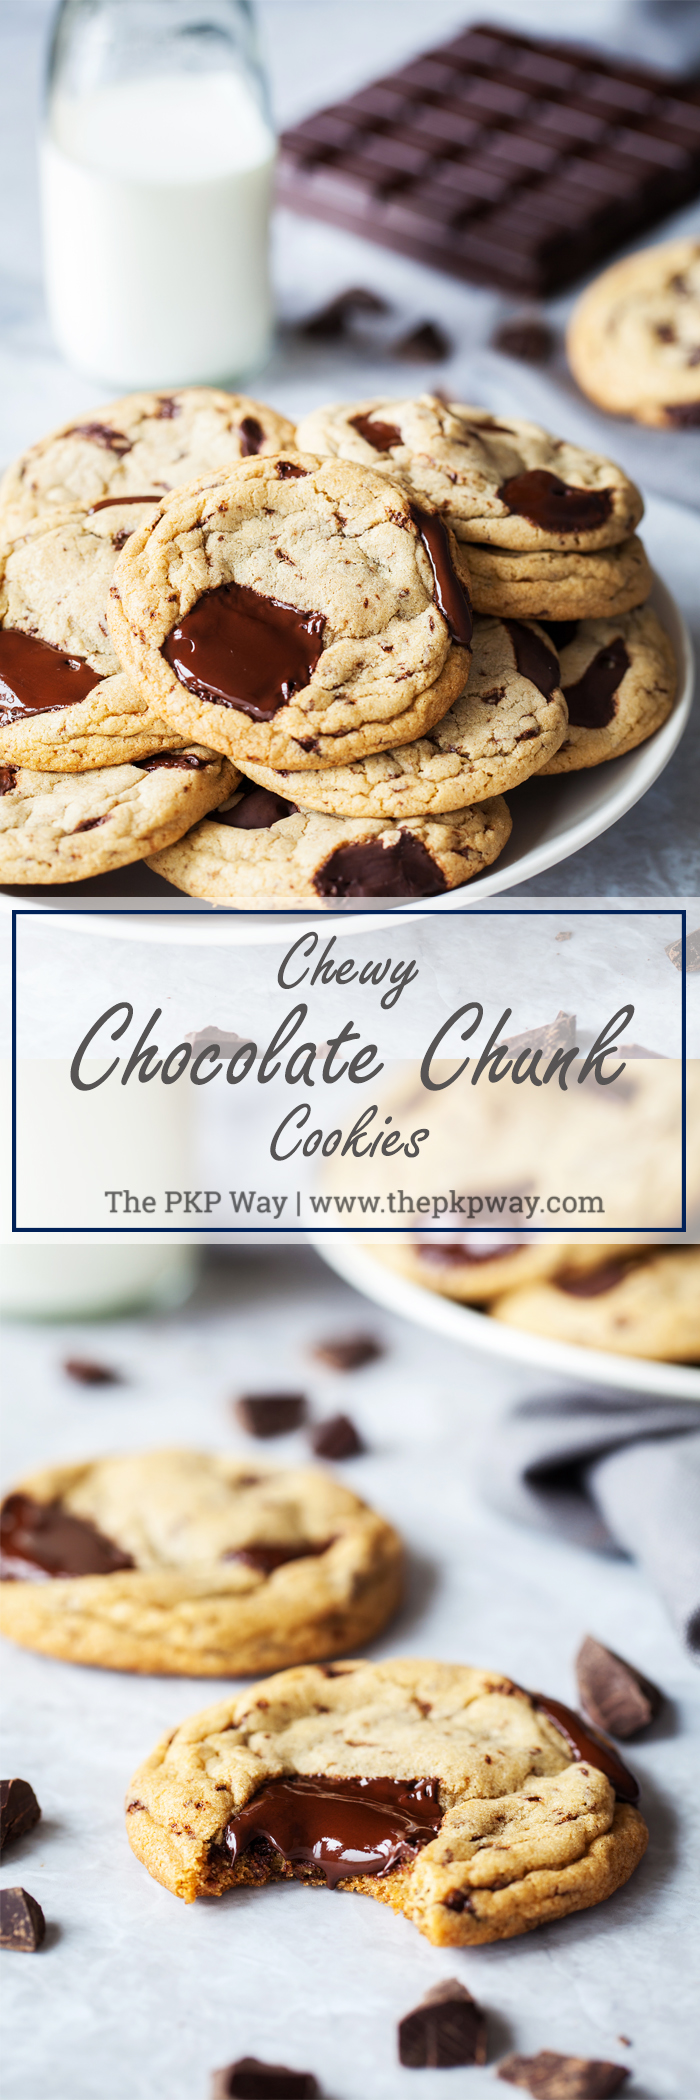 With a tender crumb and puddles of chocolate, these Chewy Chocolate Chunk Cookies will become your go-to recipe!